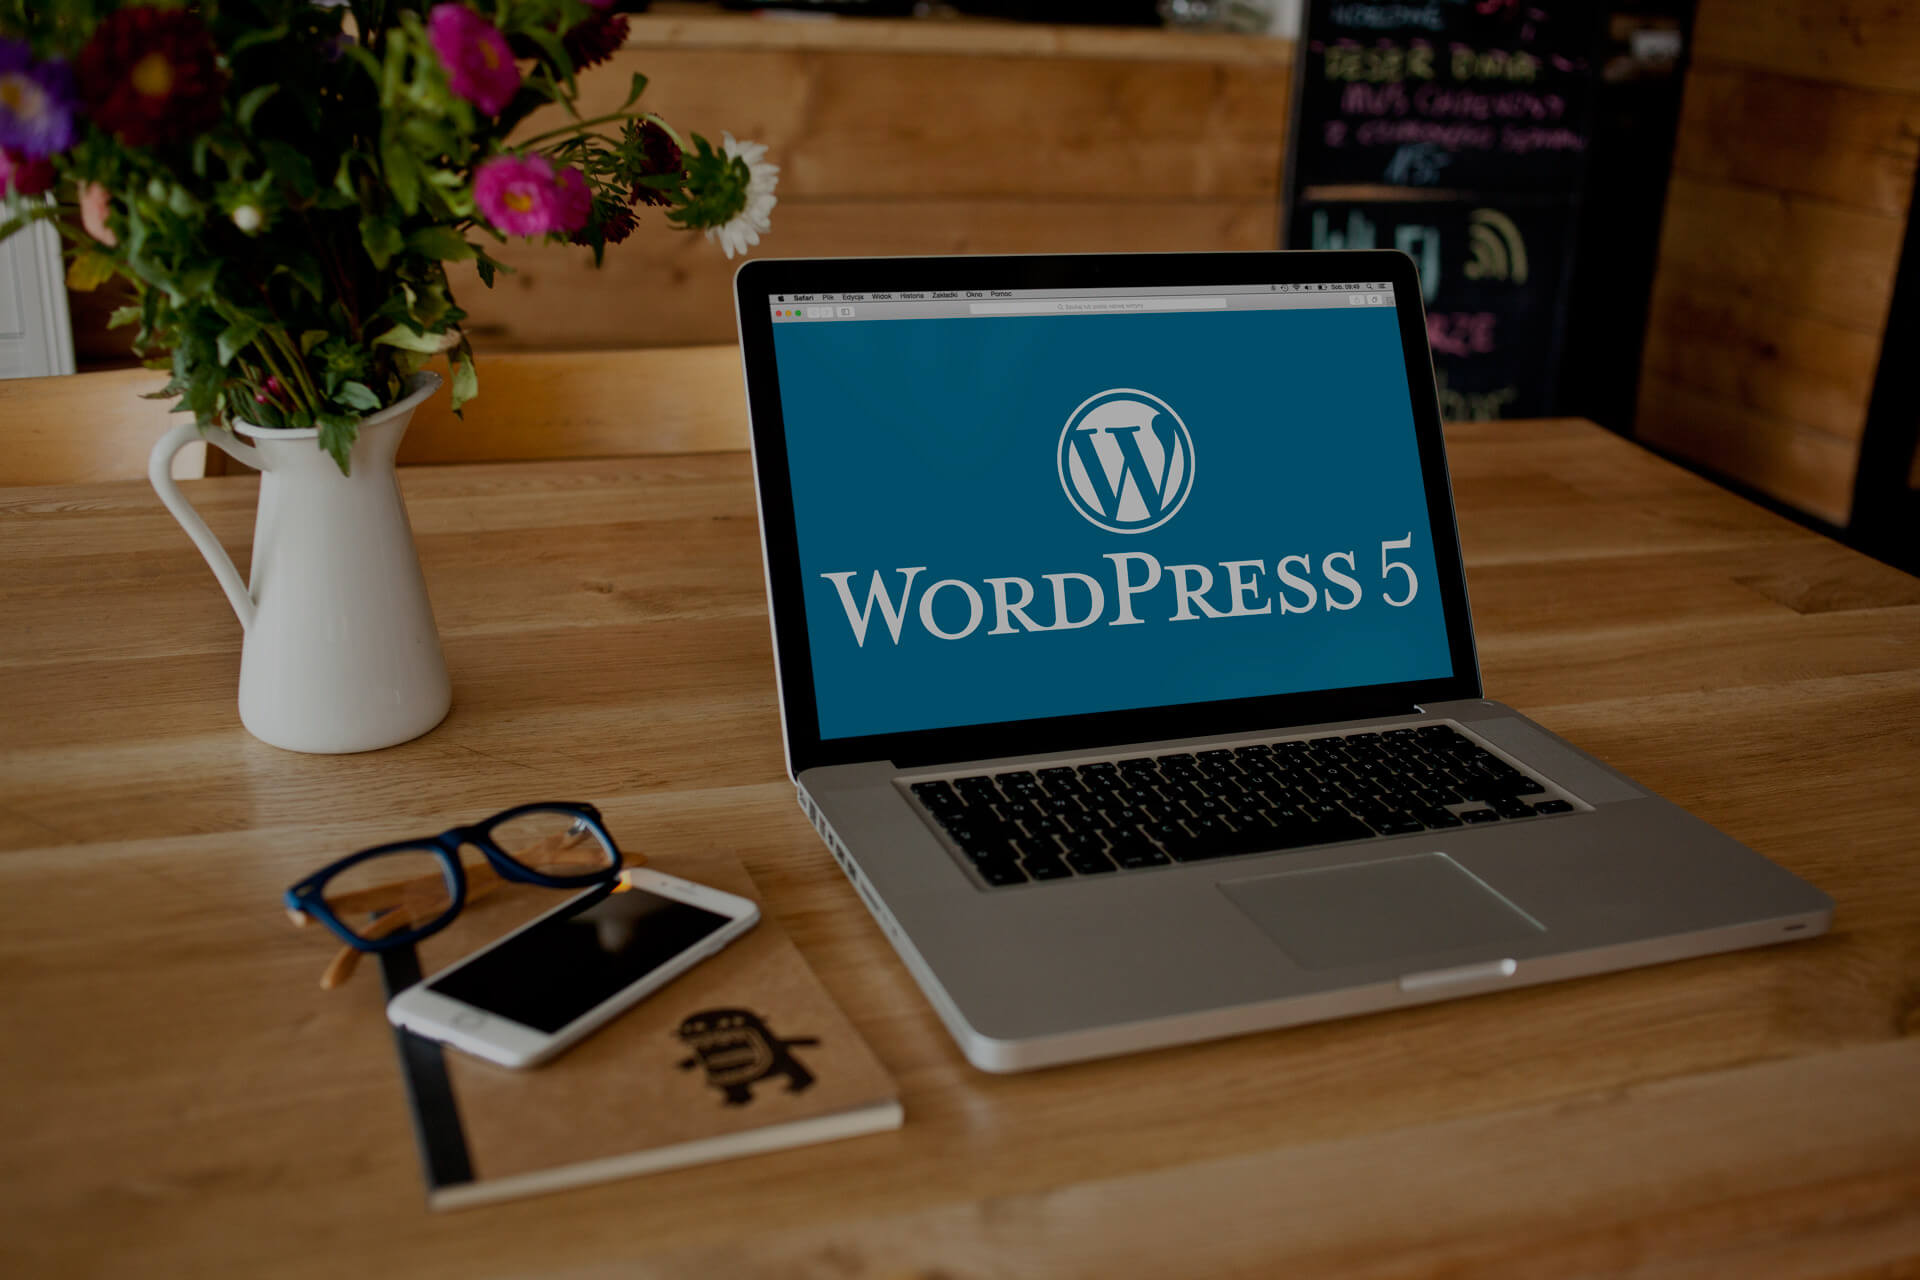 Should I update my site to WordPress 5.0: Key consideration before updating